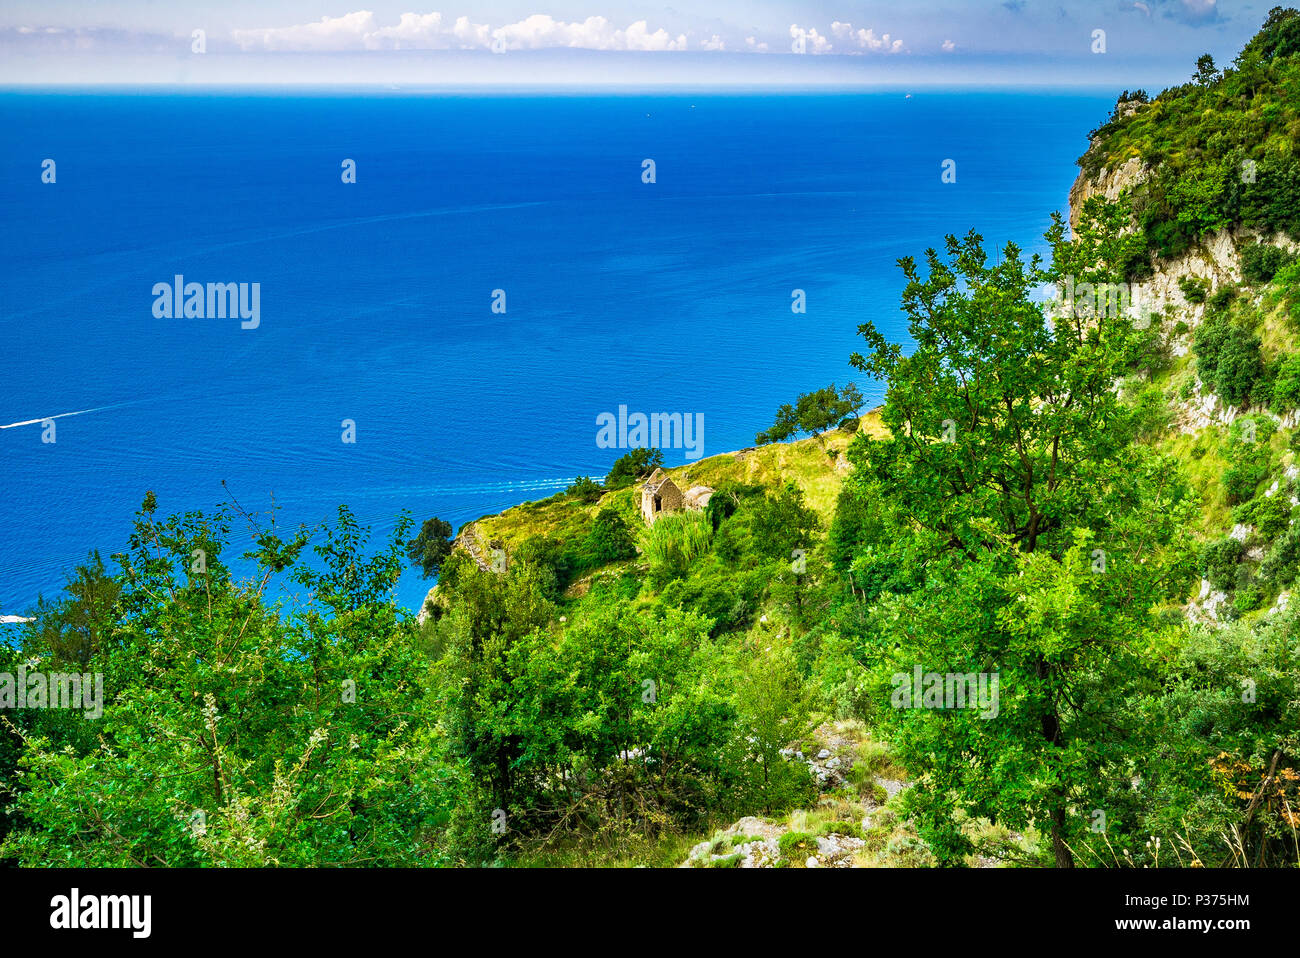 The Walk of the Gods is also known as the Path of the Gods and offers stunning views of the Amalfi Coast. Stock Photo